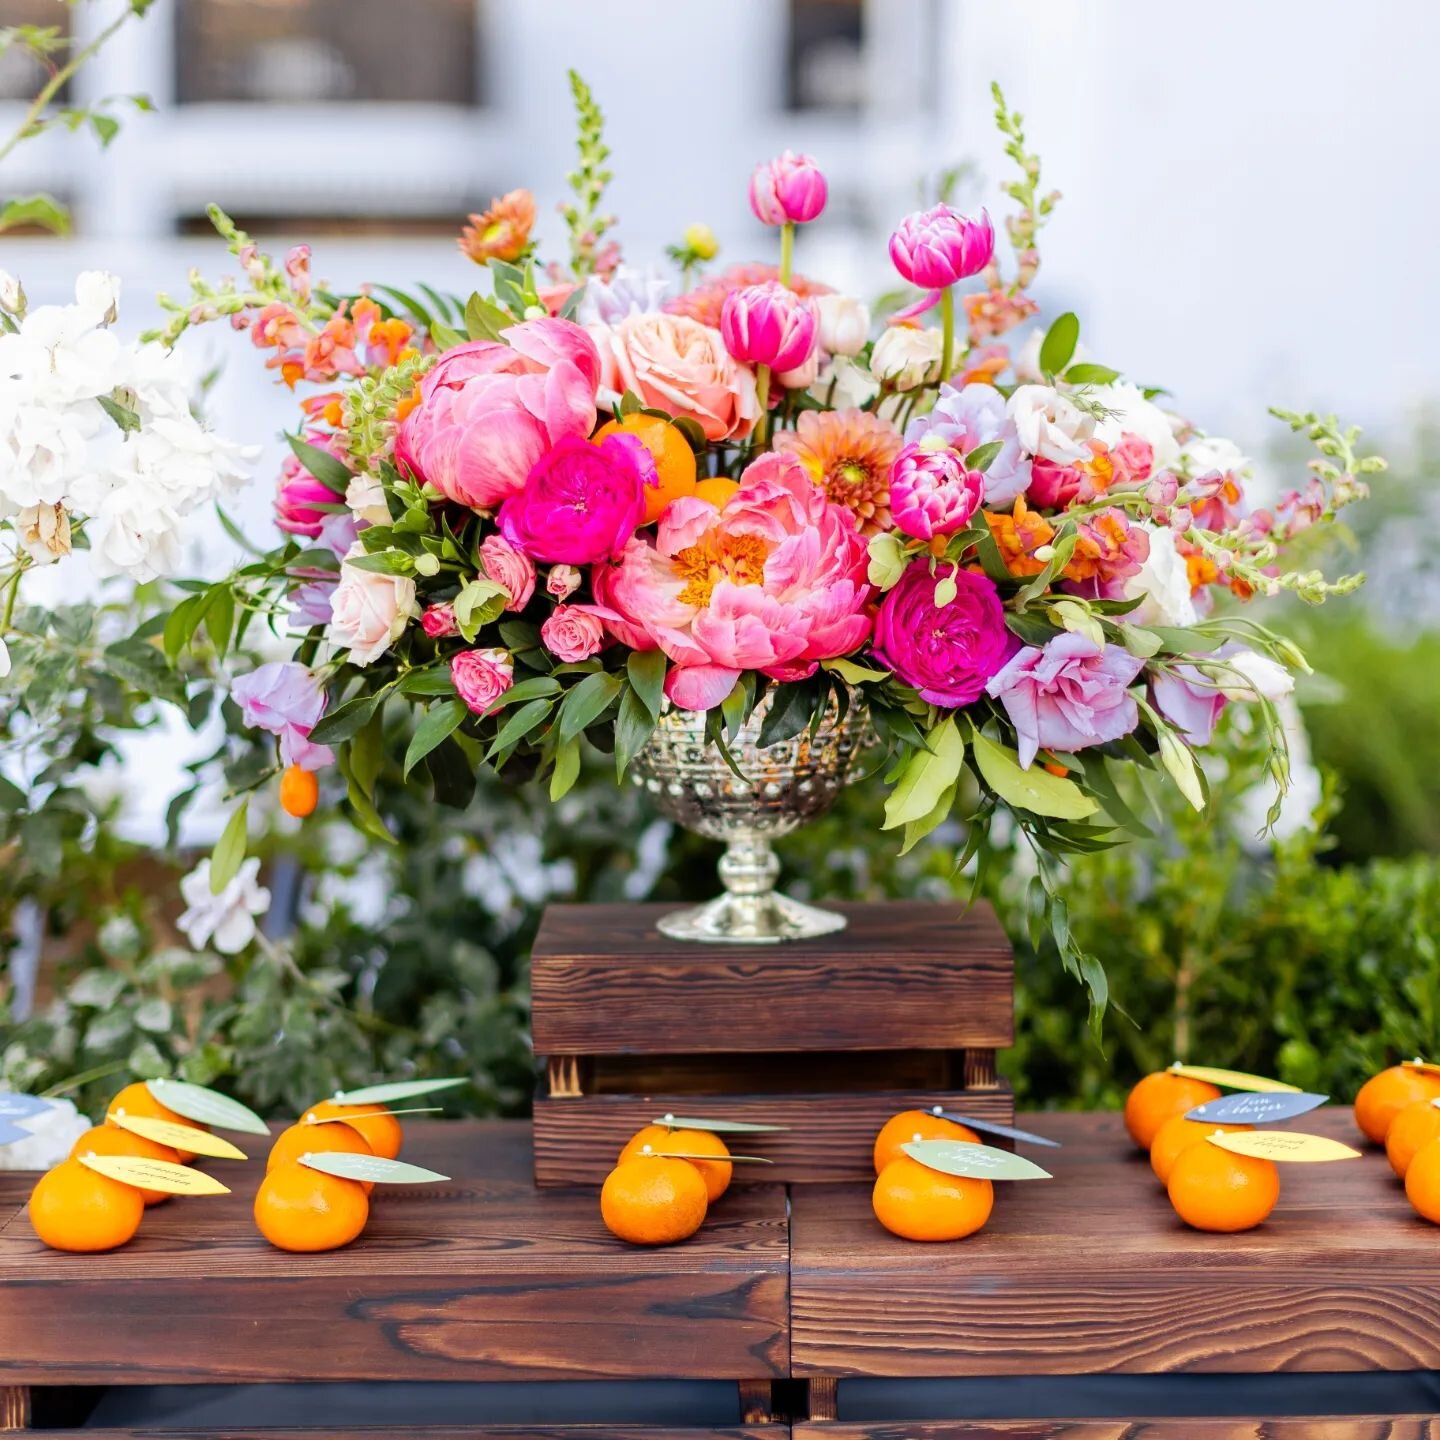 The most delicious, citrus-inspired decor that we ever-did-see! We love collaborating design with our gal pal Heather from Delmar Events! We'd say Seed Floral nailed this gorgeous look! 
.
.
Planner: @delmarevents
Venue: @thelondonweho
DJ/Lighting: @